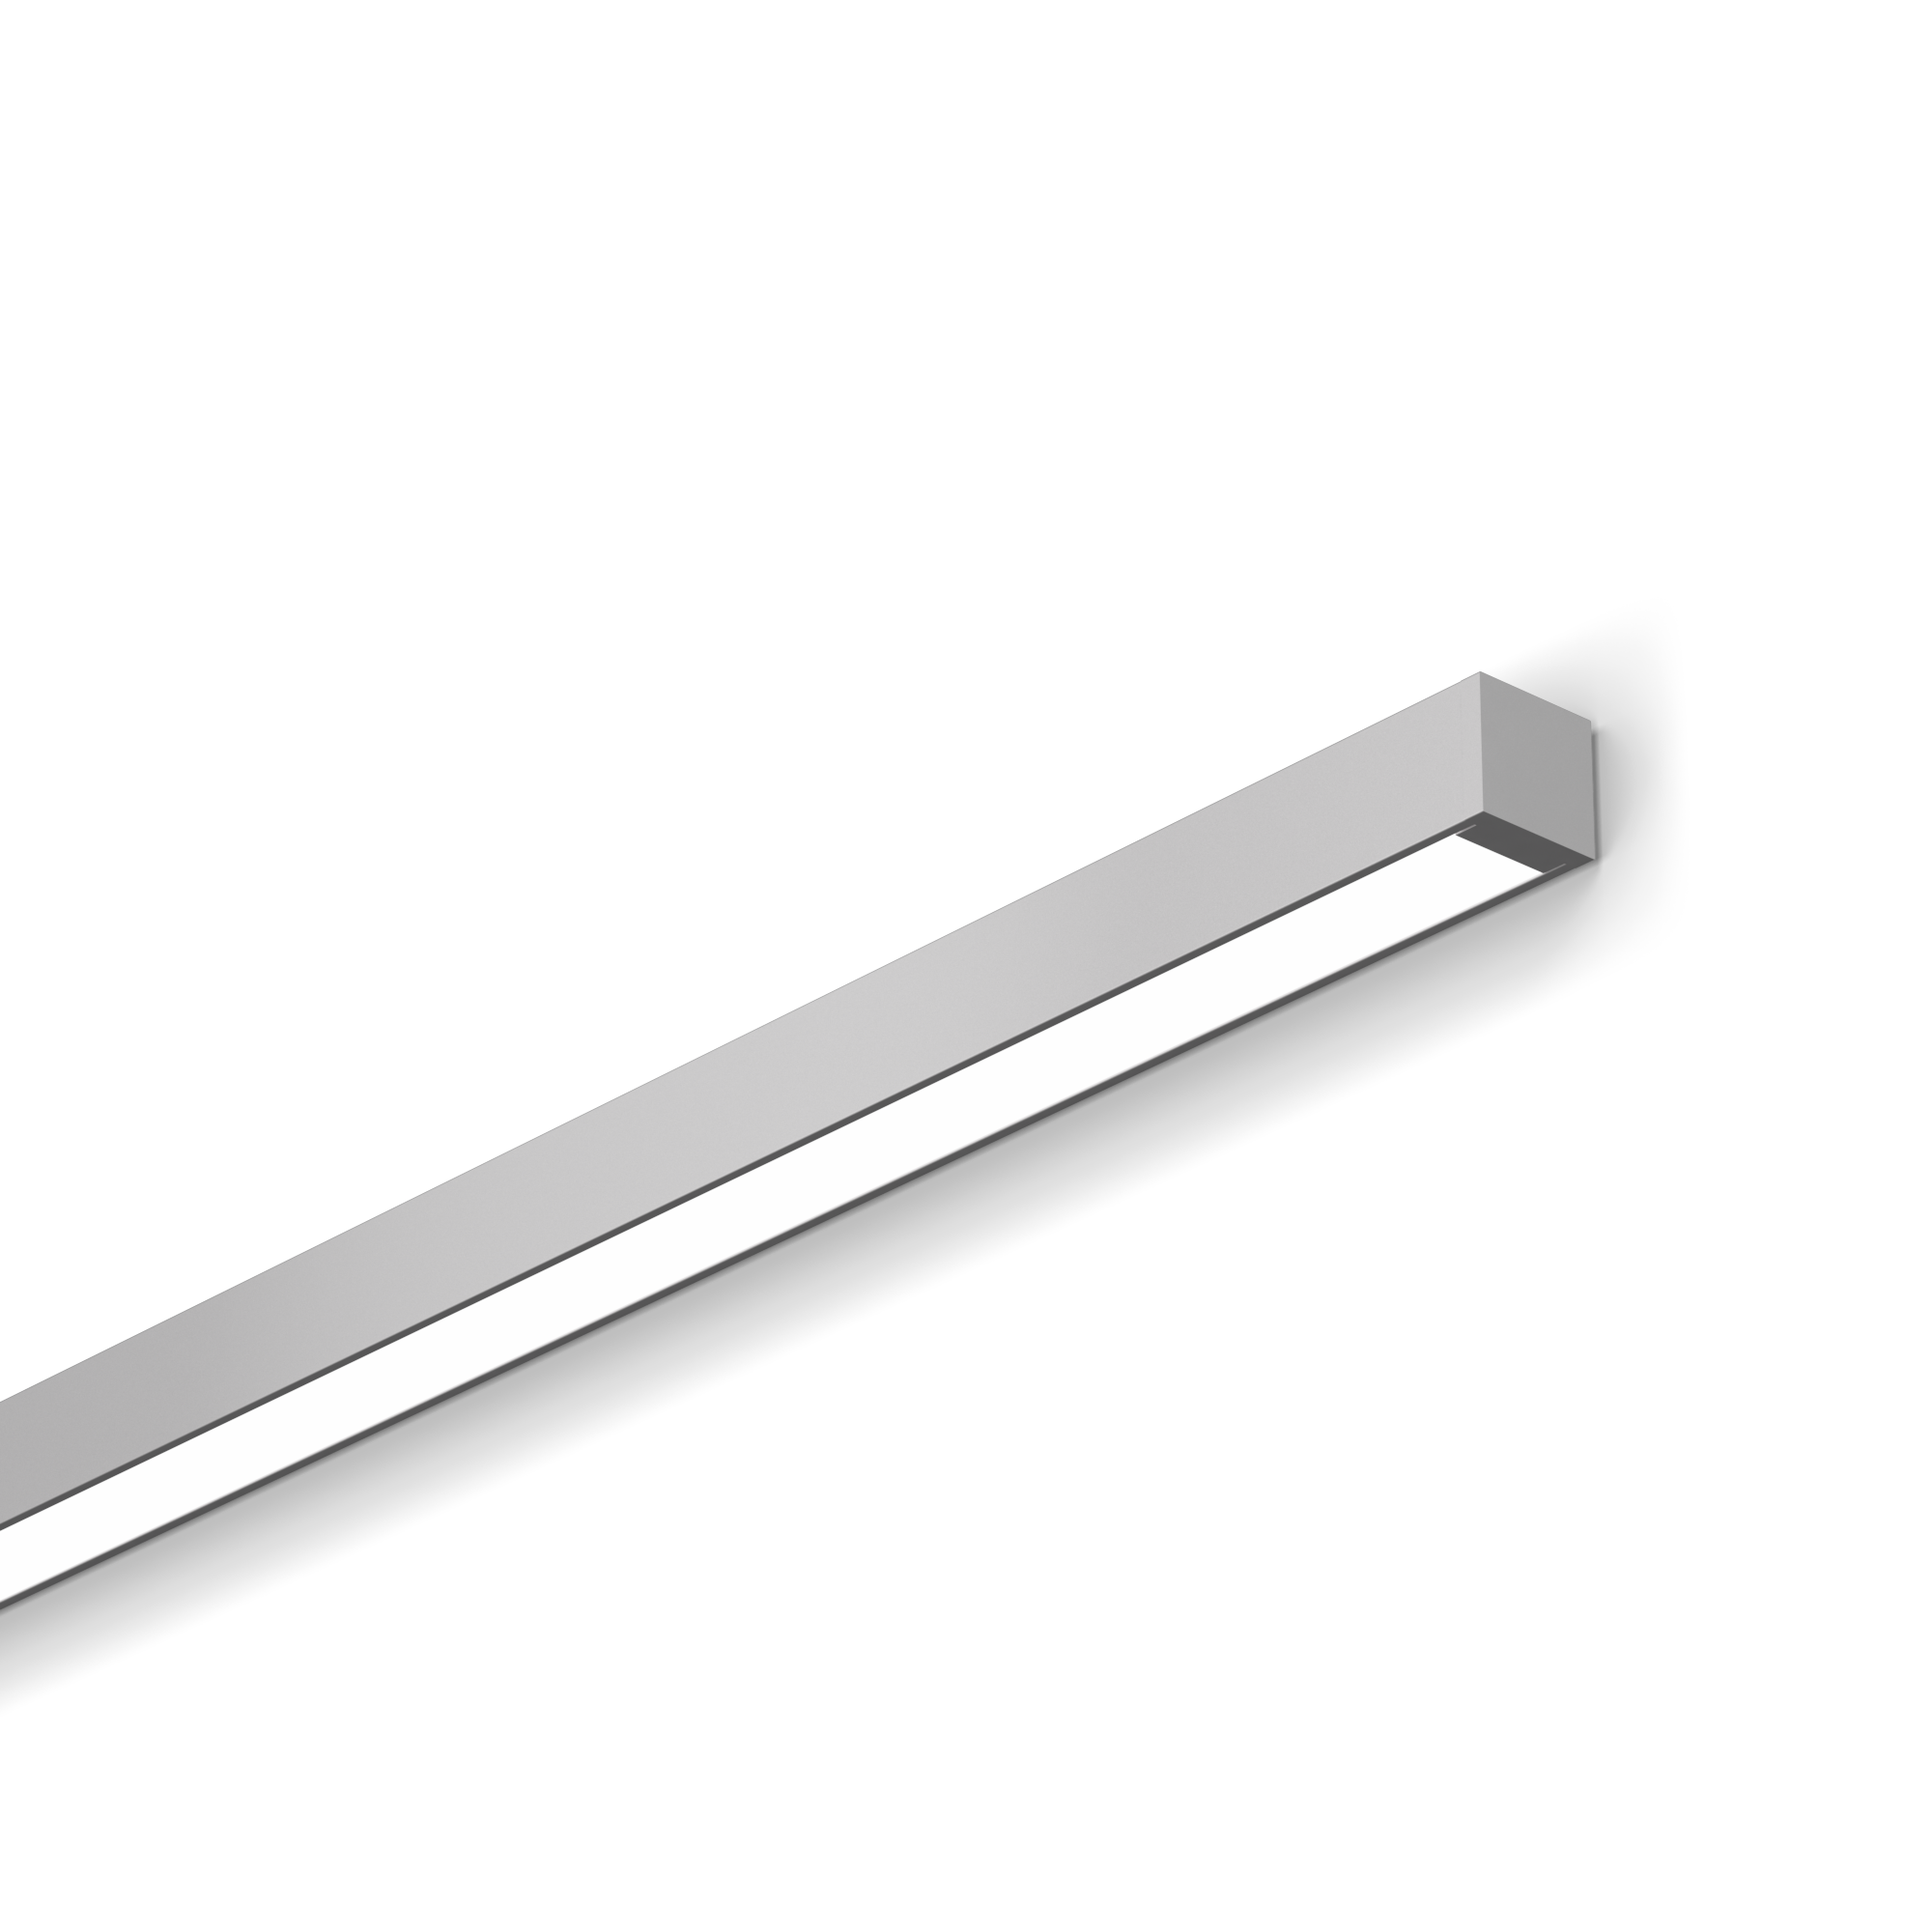 Description
0.95” Ultra-Compact Wall Mounted LED Linear
NANOSquare is 0.95” square, bringing SmartBeam® capabilities to a wall-mounted graphic scale that complements architectural space. NANOSquare features a remote driver to remove visual bulk.